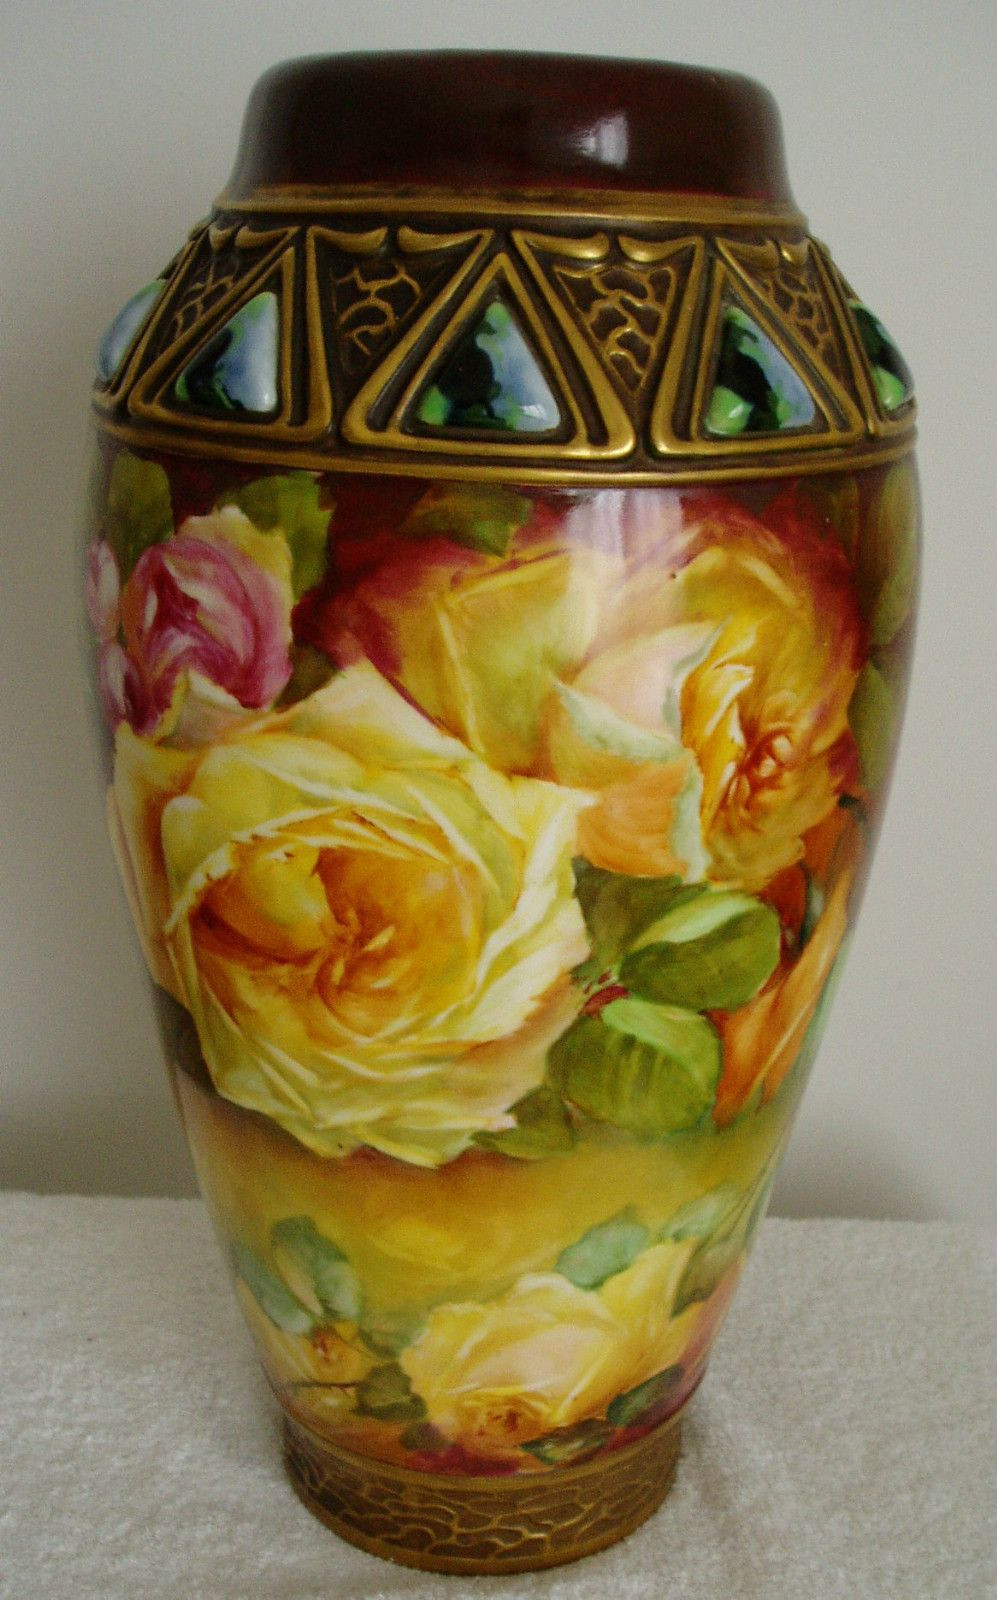 28 Best Very Large Ceramic Vases 2024 free download very large ceramic vases of habsburg austria vintage large art pottery vase hand painted roses with habsburg austria vintage large art pottery vase hand painted roses ebay